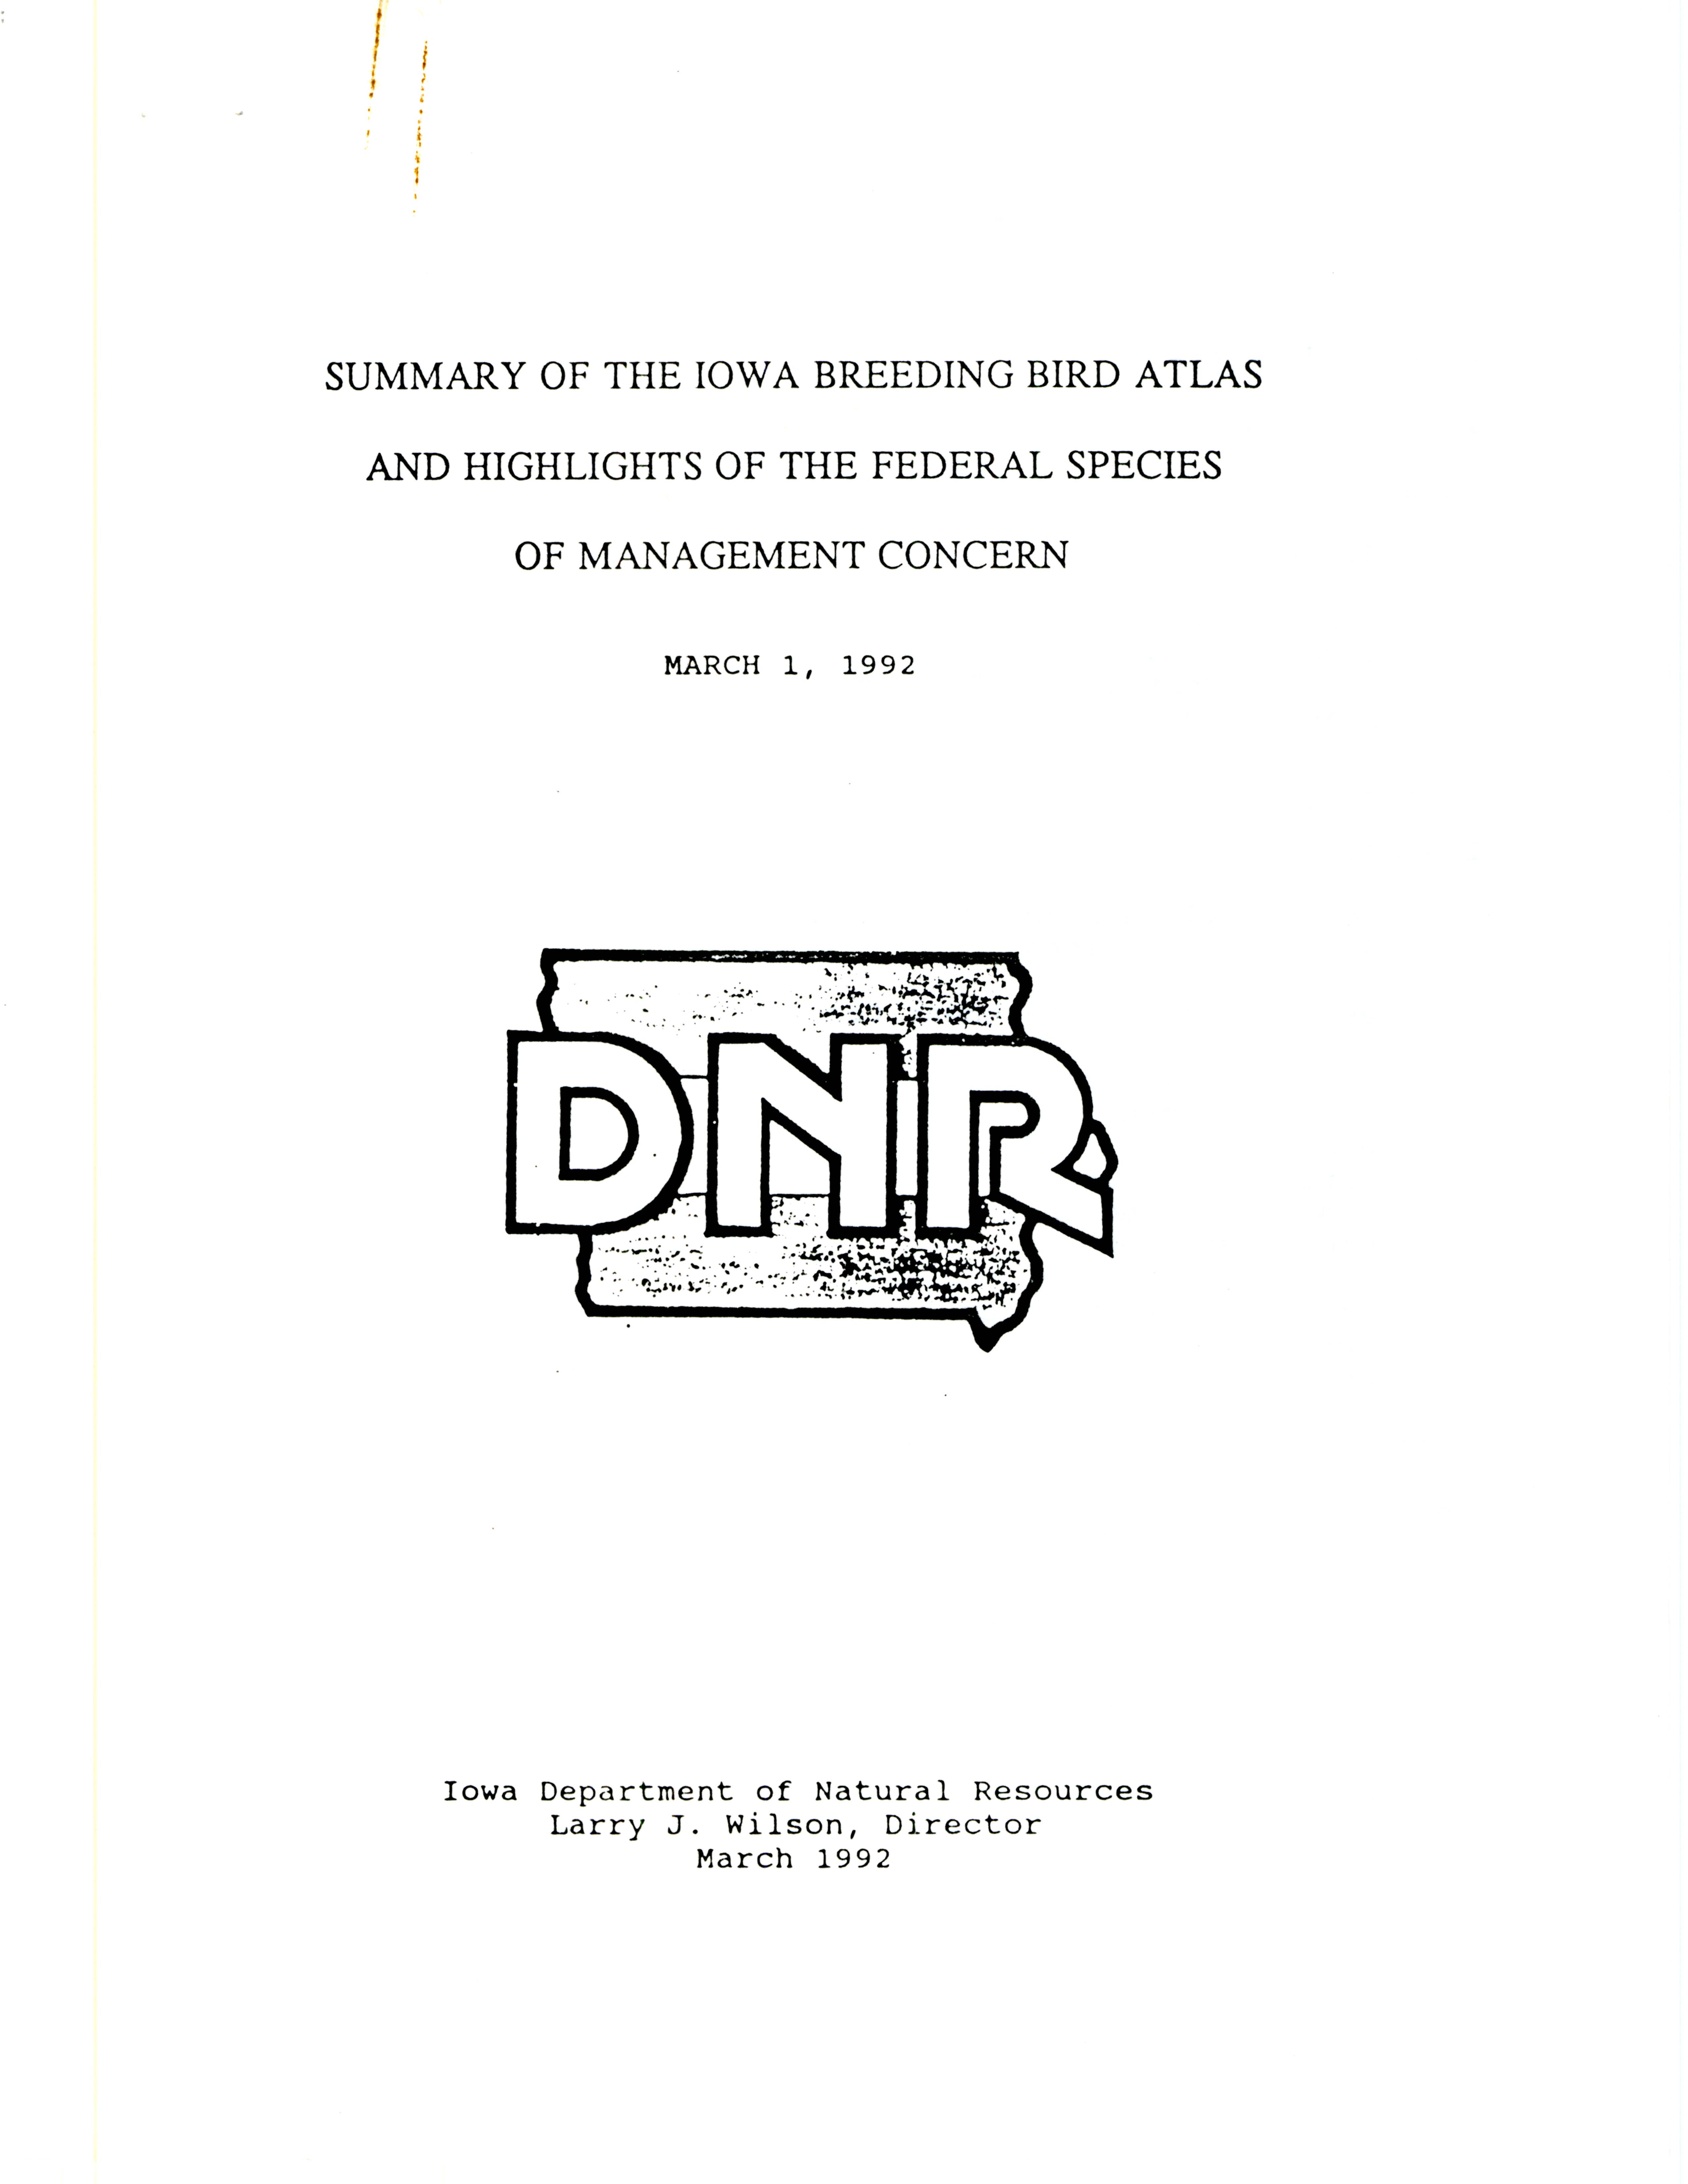 Summary of the Iowa Breeding Bird Atlas and highlights of the Federal Species of Management Concern, March 1, 1992